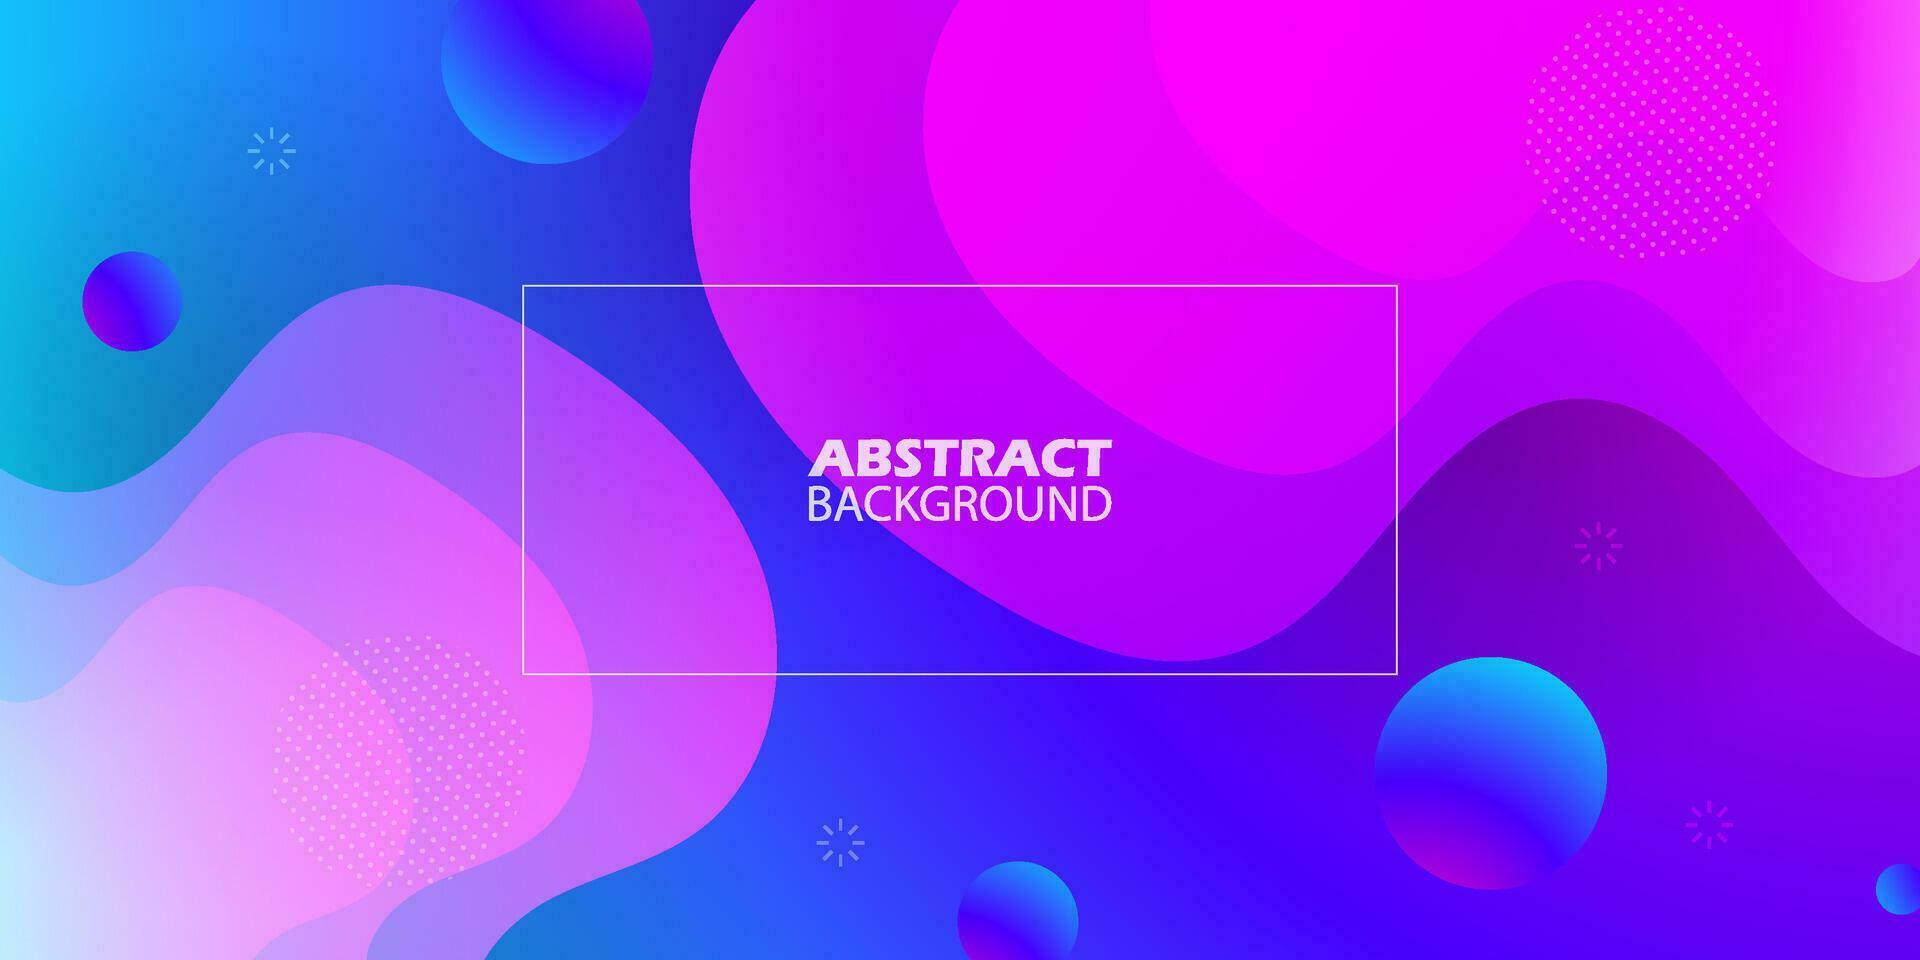 Papercut purple, blue and pink gradient abstract background with realistic 3d papercut craft art style. Modern business presentation illustration or creative project template. Eps10 vector